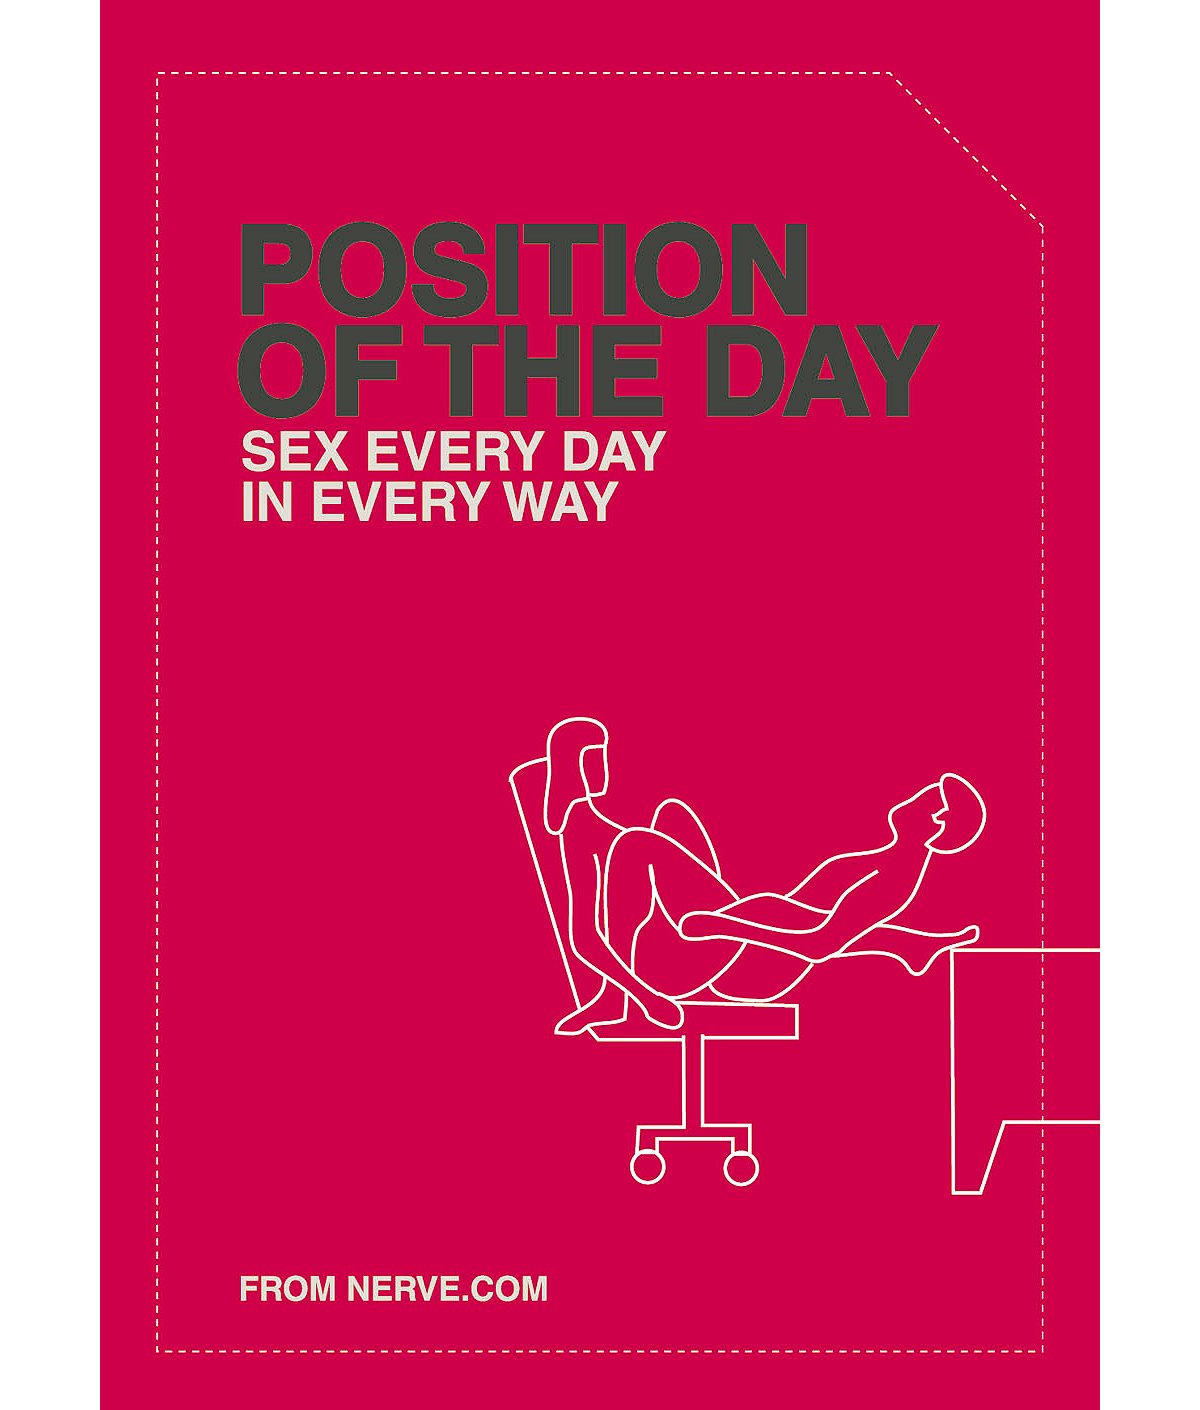 Positions book